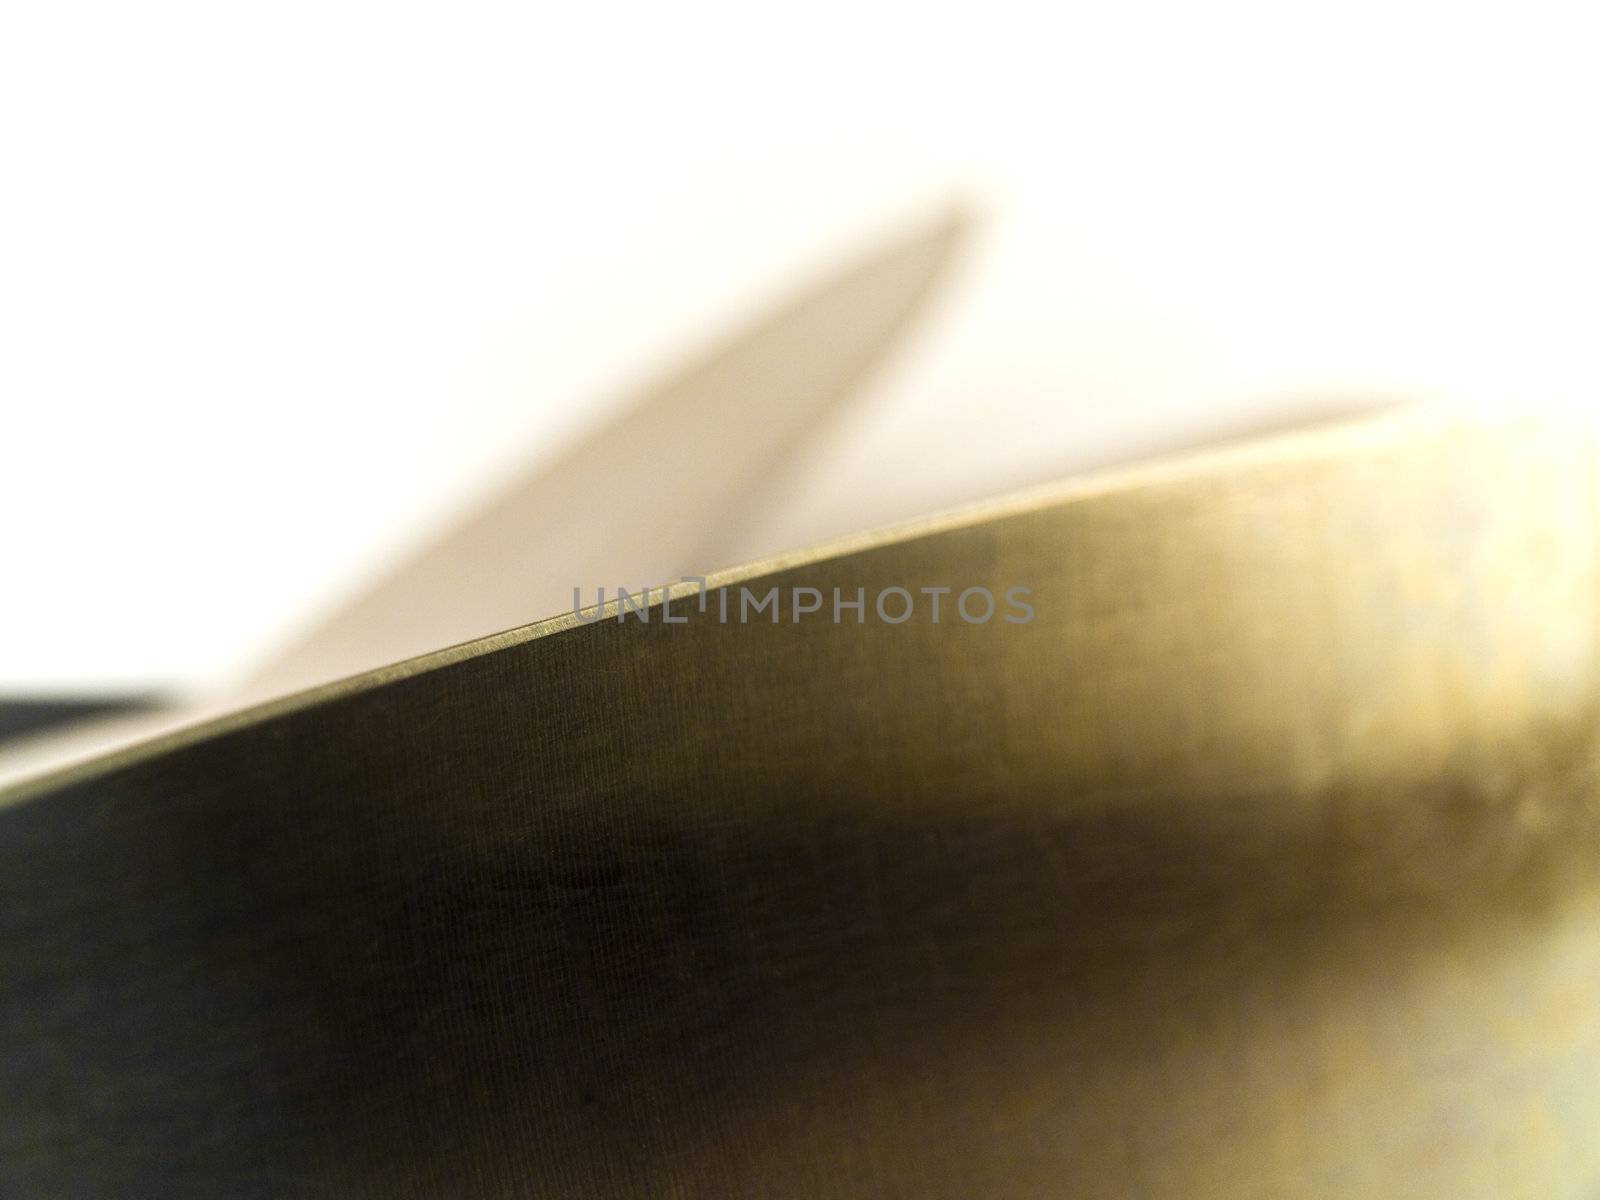 The Cutting Edge of a Knife on White Background